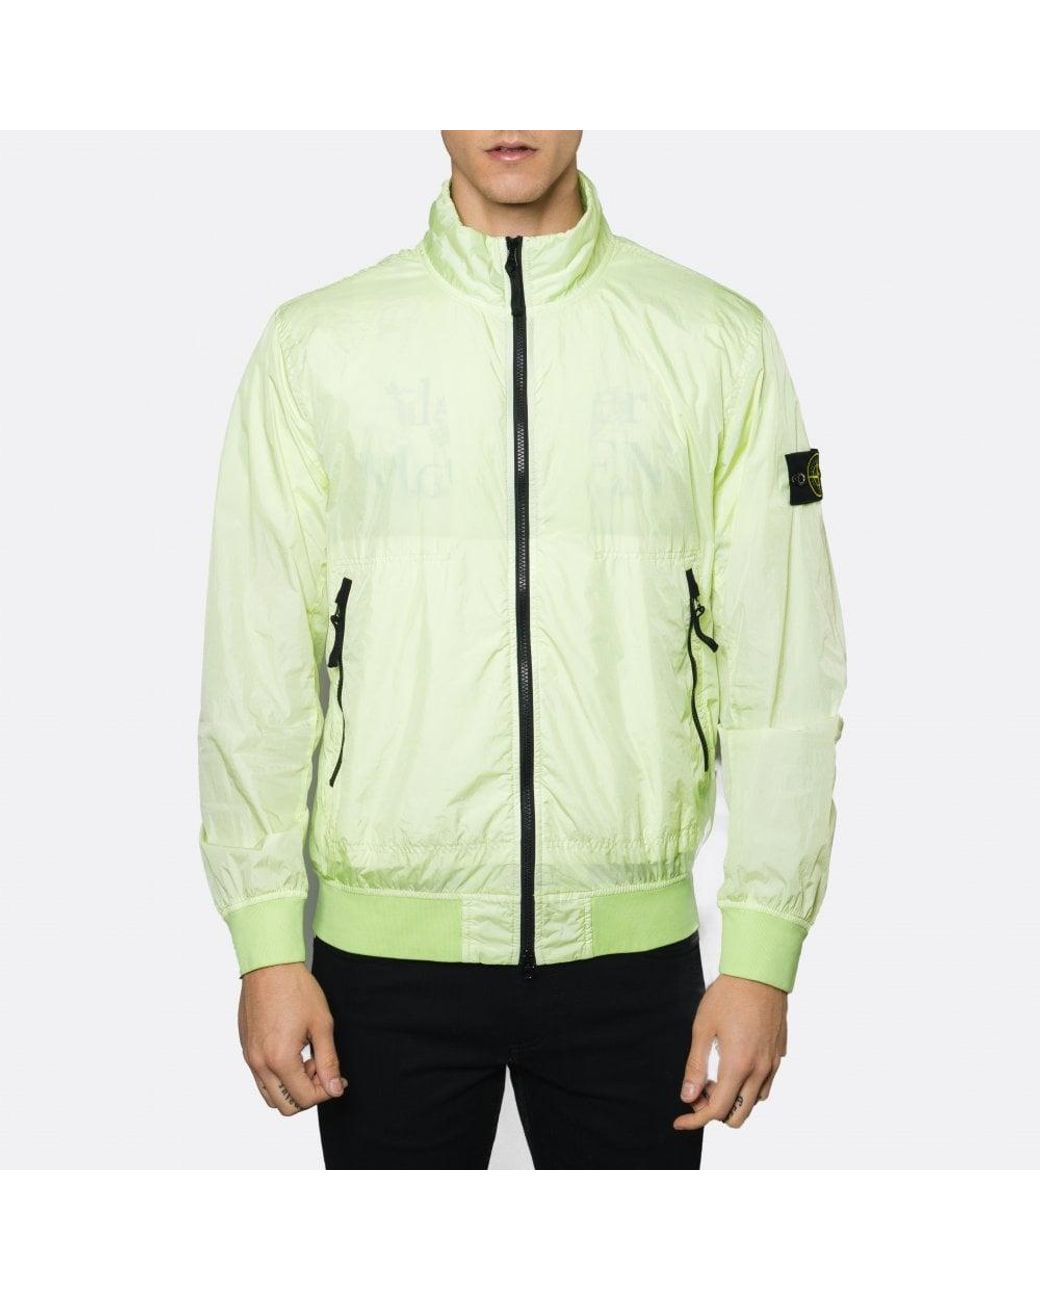 Stone Island Garment Dyed Crinkle Reps Ny Jacket in Green for Men | Lyst